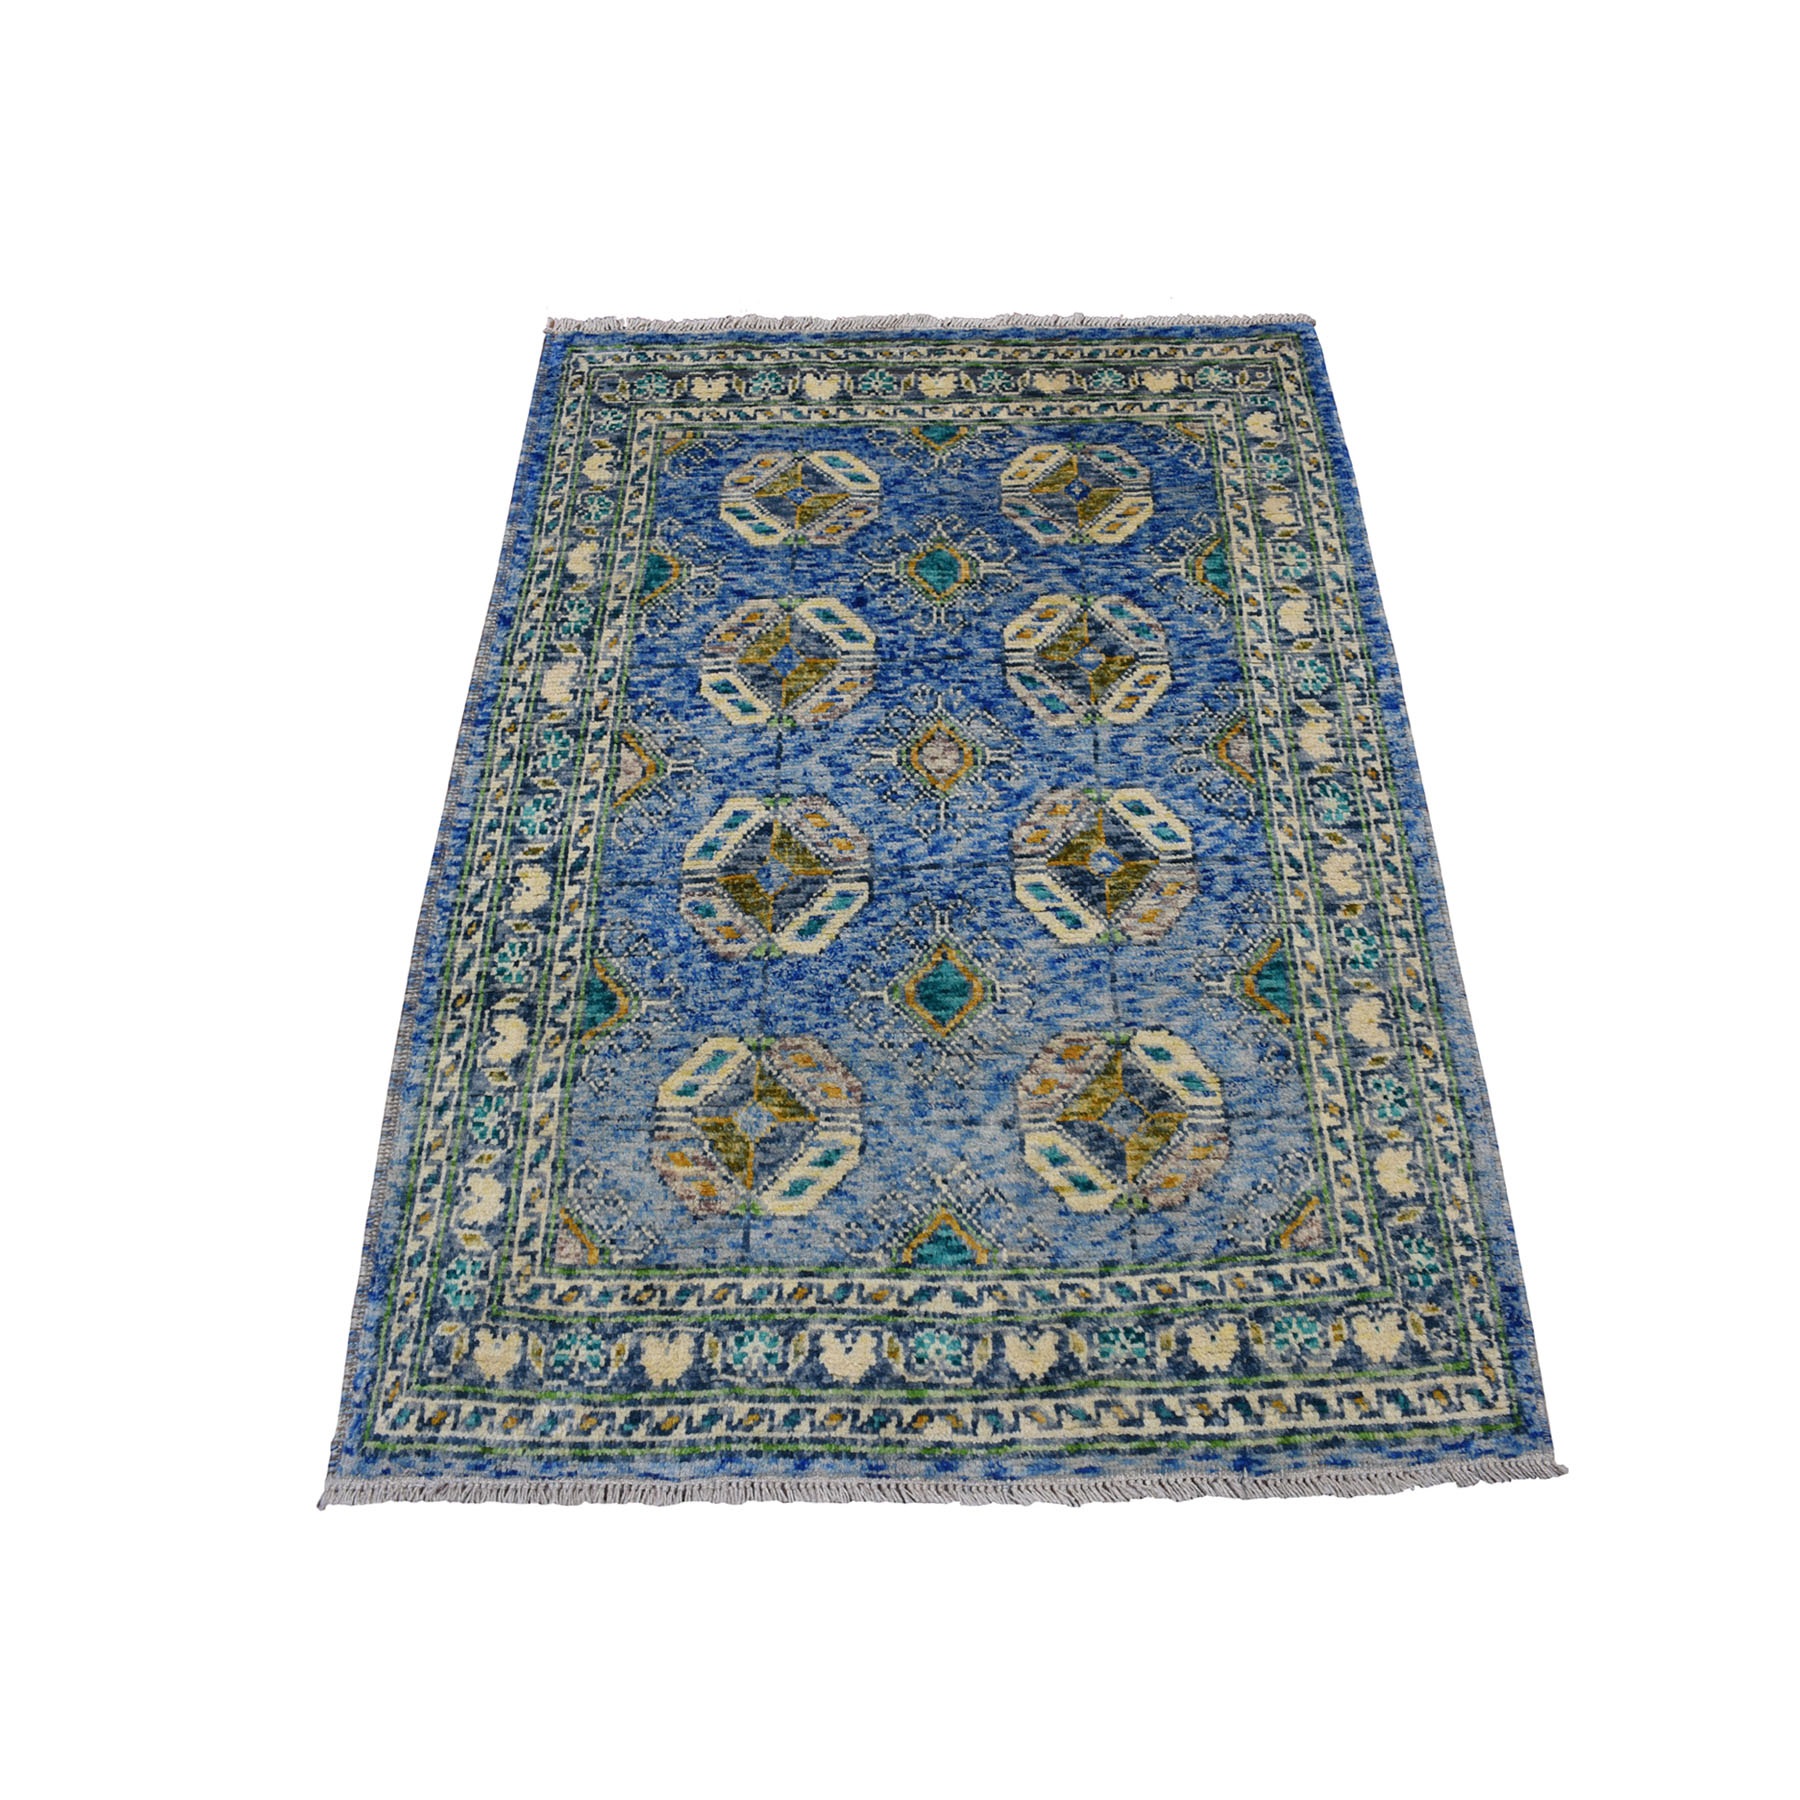 3'5"X4'10" Geometric Design Colorful Afghan Baluch Hand Knotted 100% Wool Oriental Rug moaeca7a